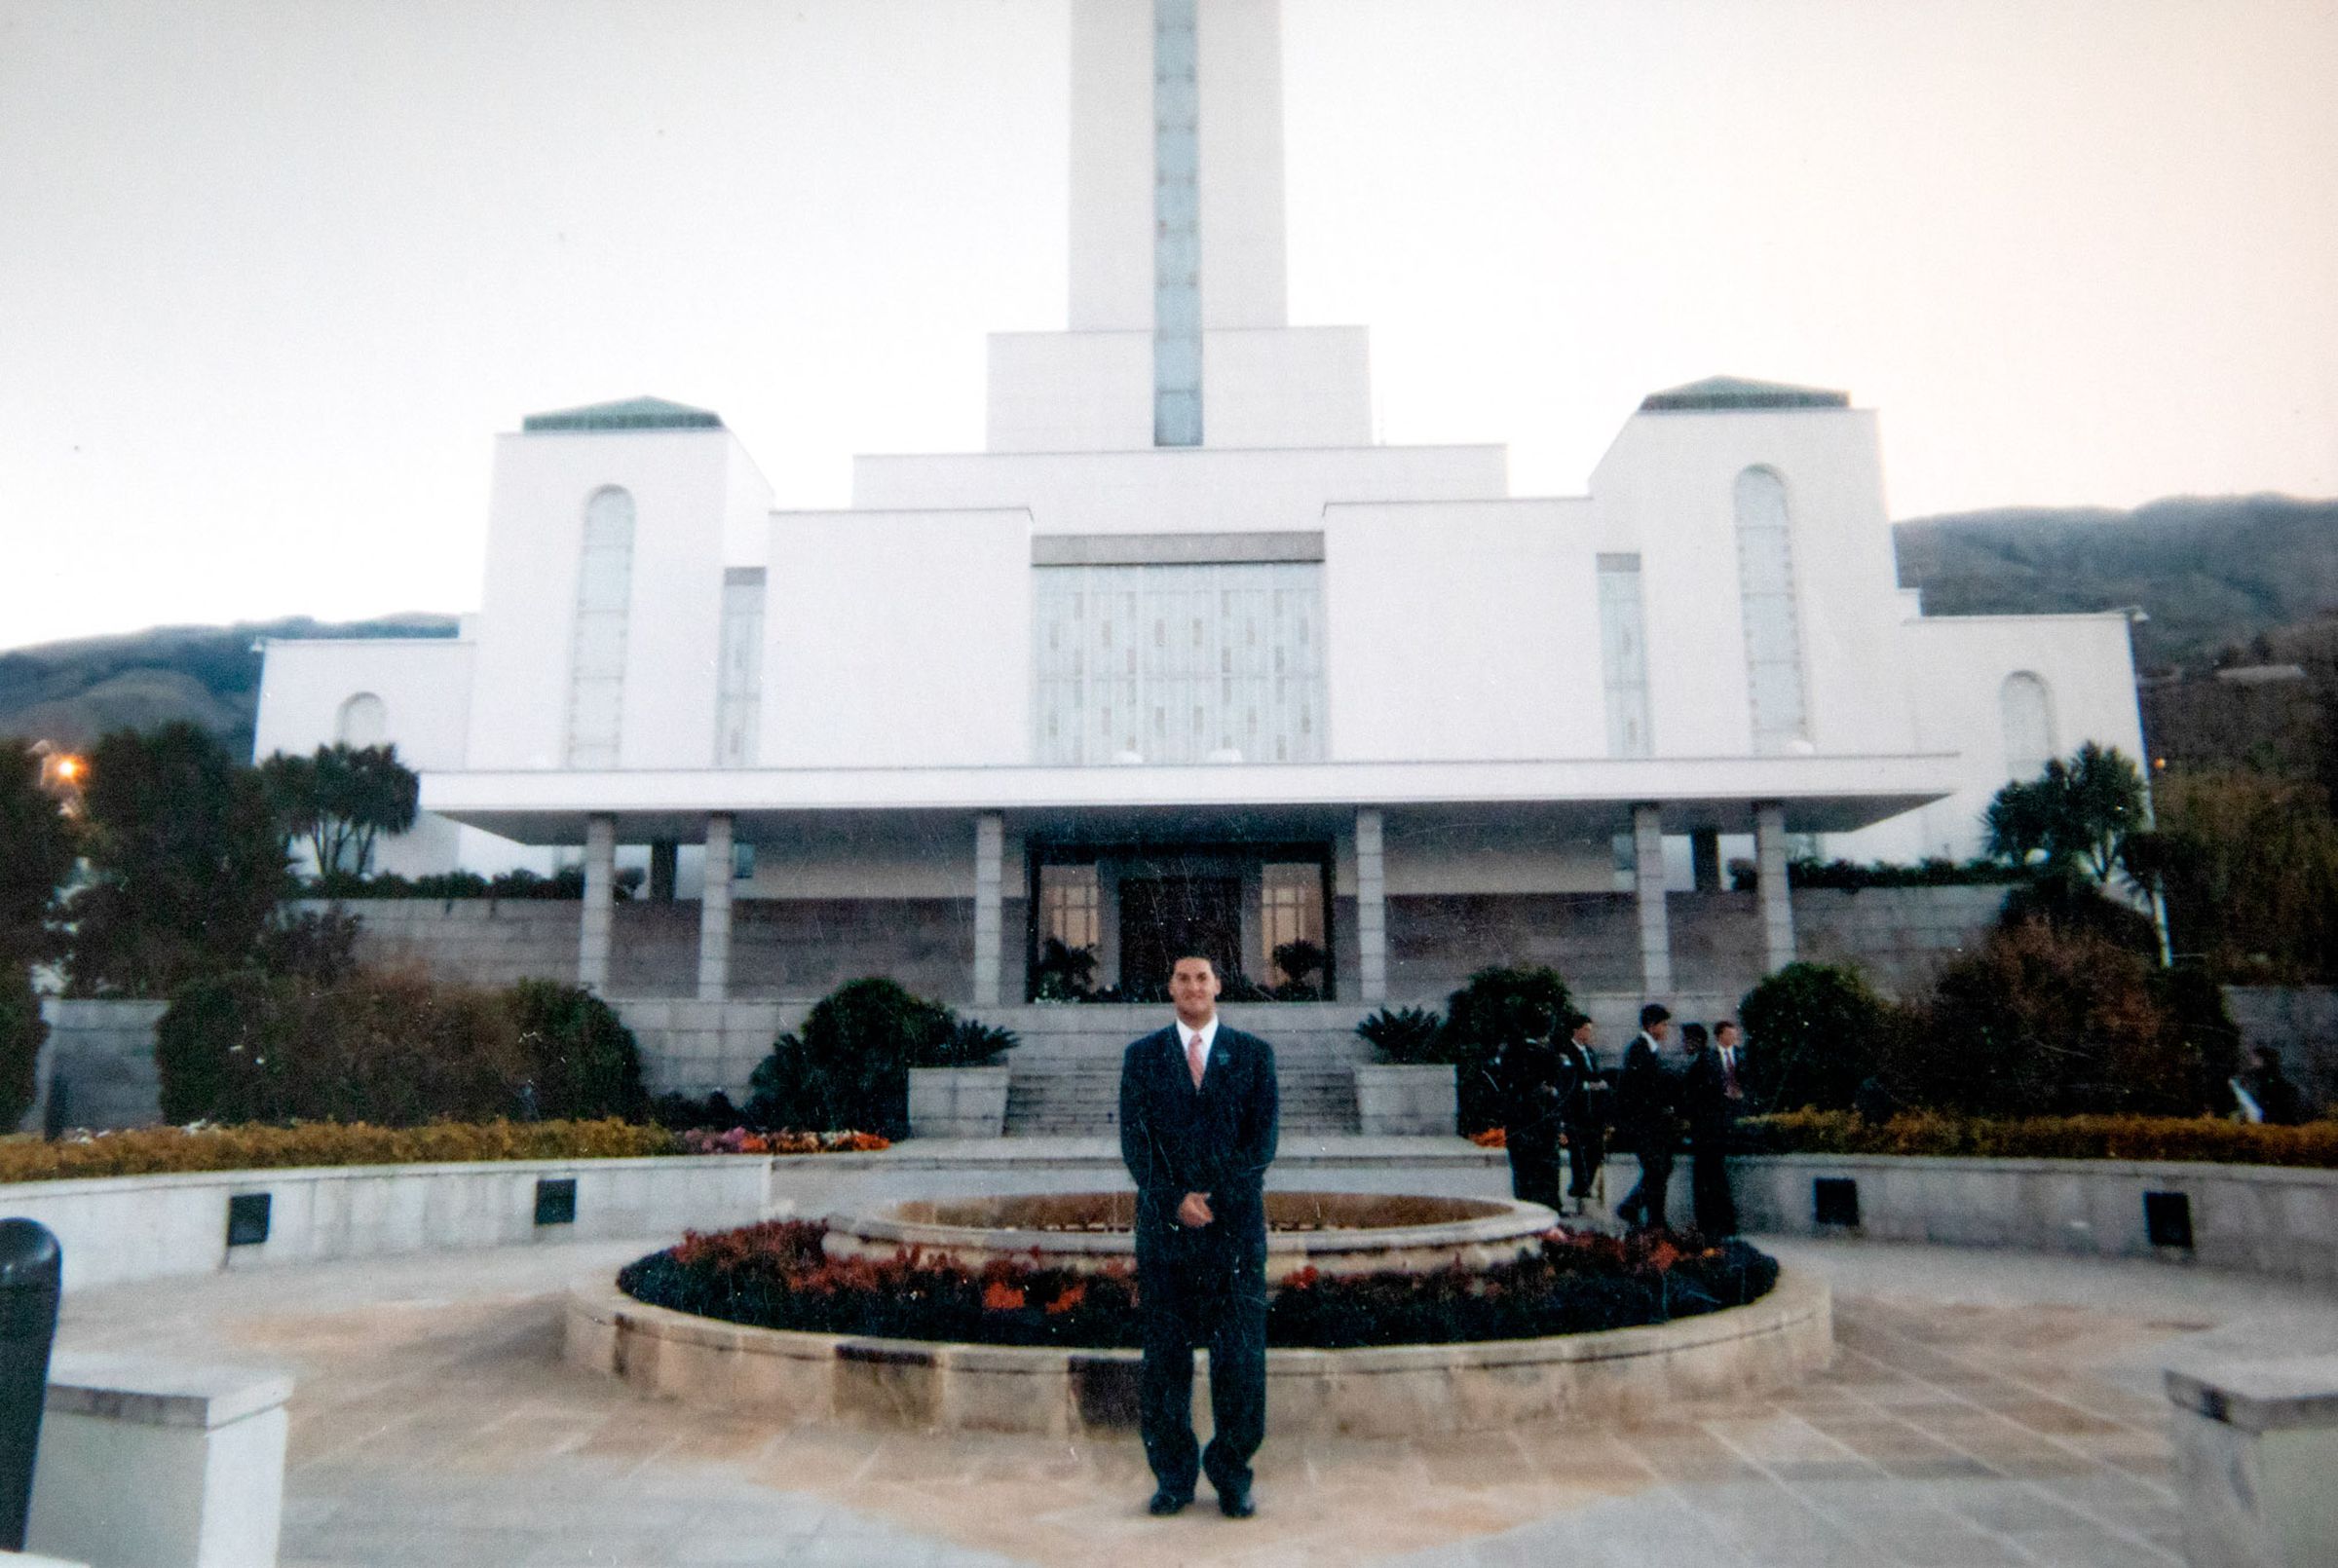 A personal photo of Joseph outside an LDS temple during his mission in Bolivia for the LDS Church.